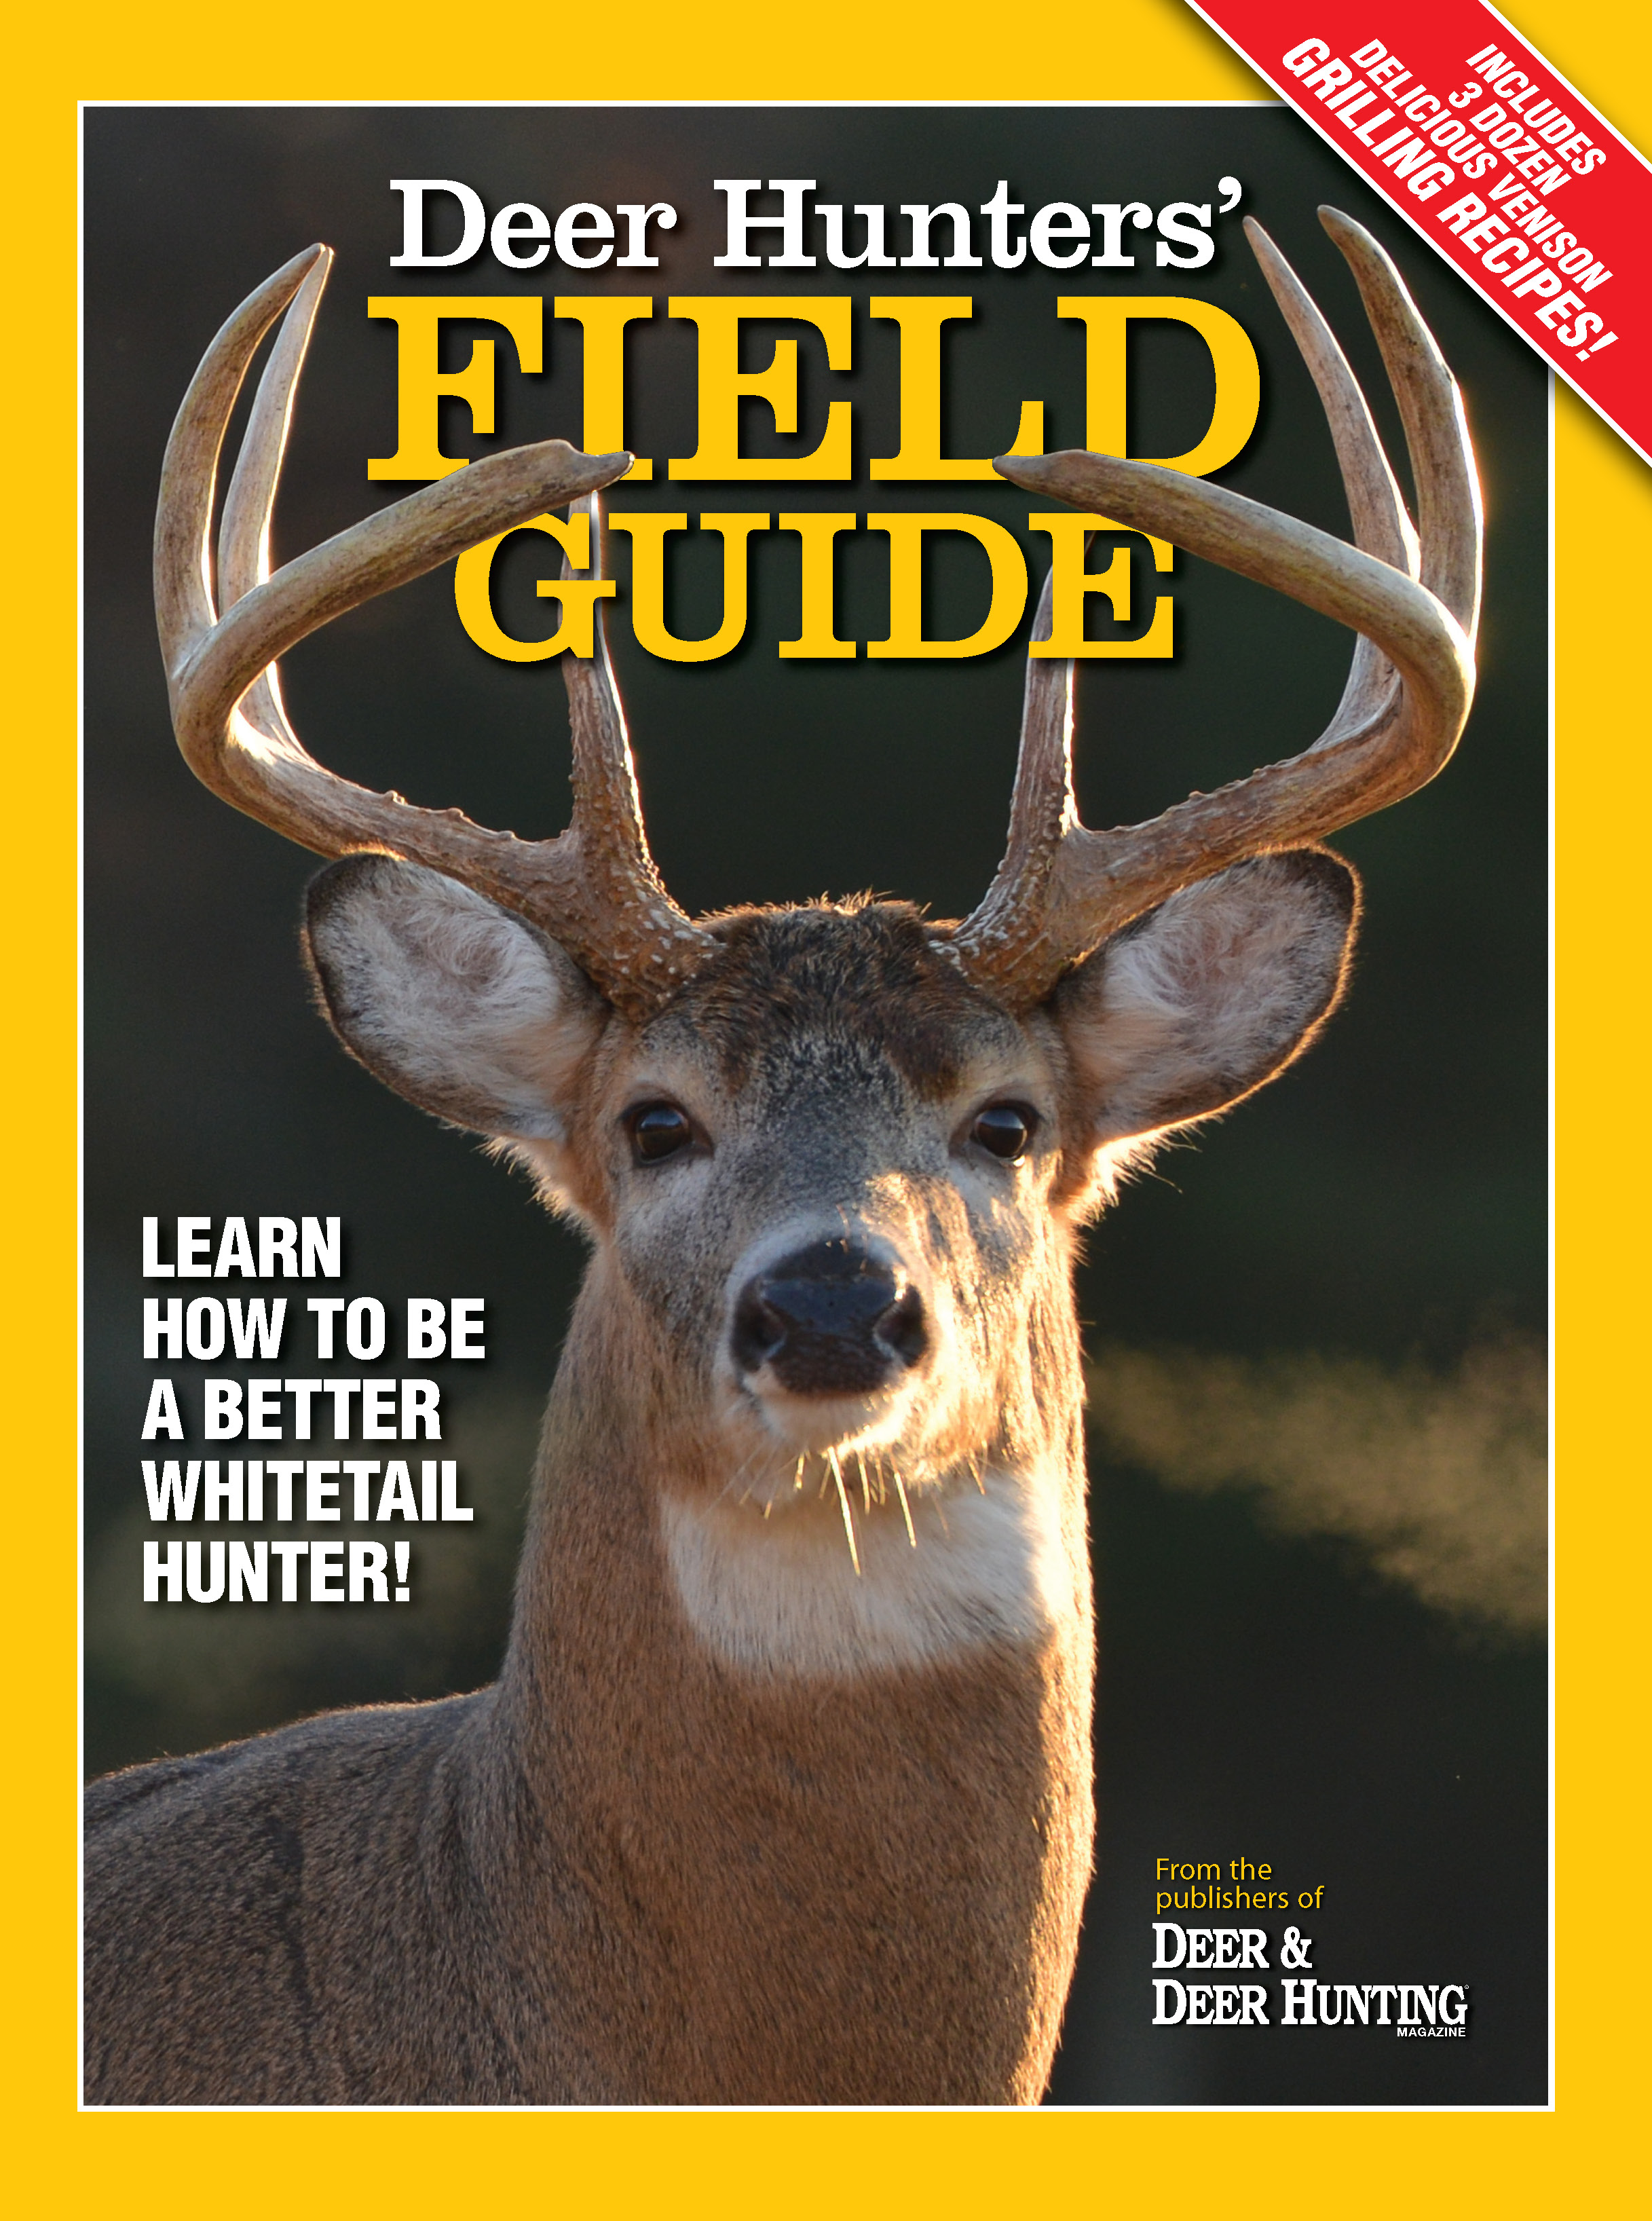 Deer Hunters' Field Guide Available Exclusively at Walmart